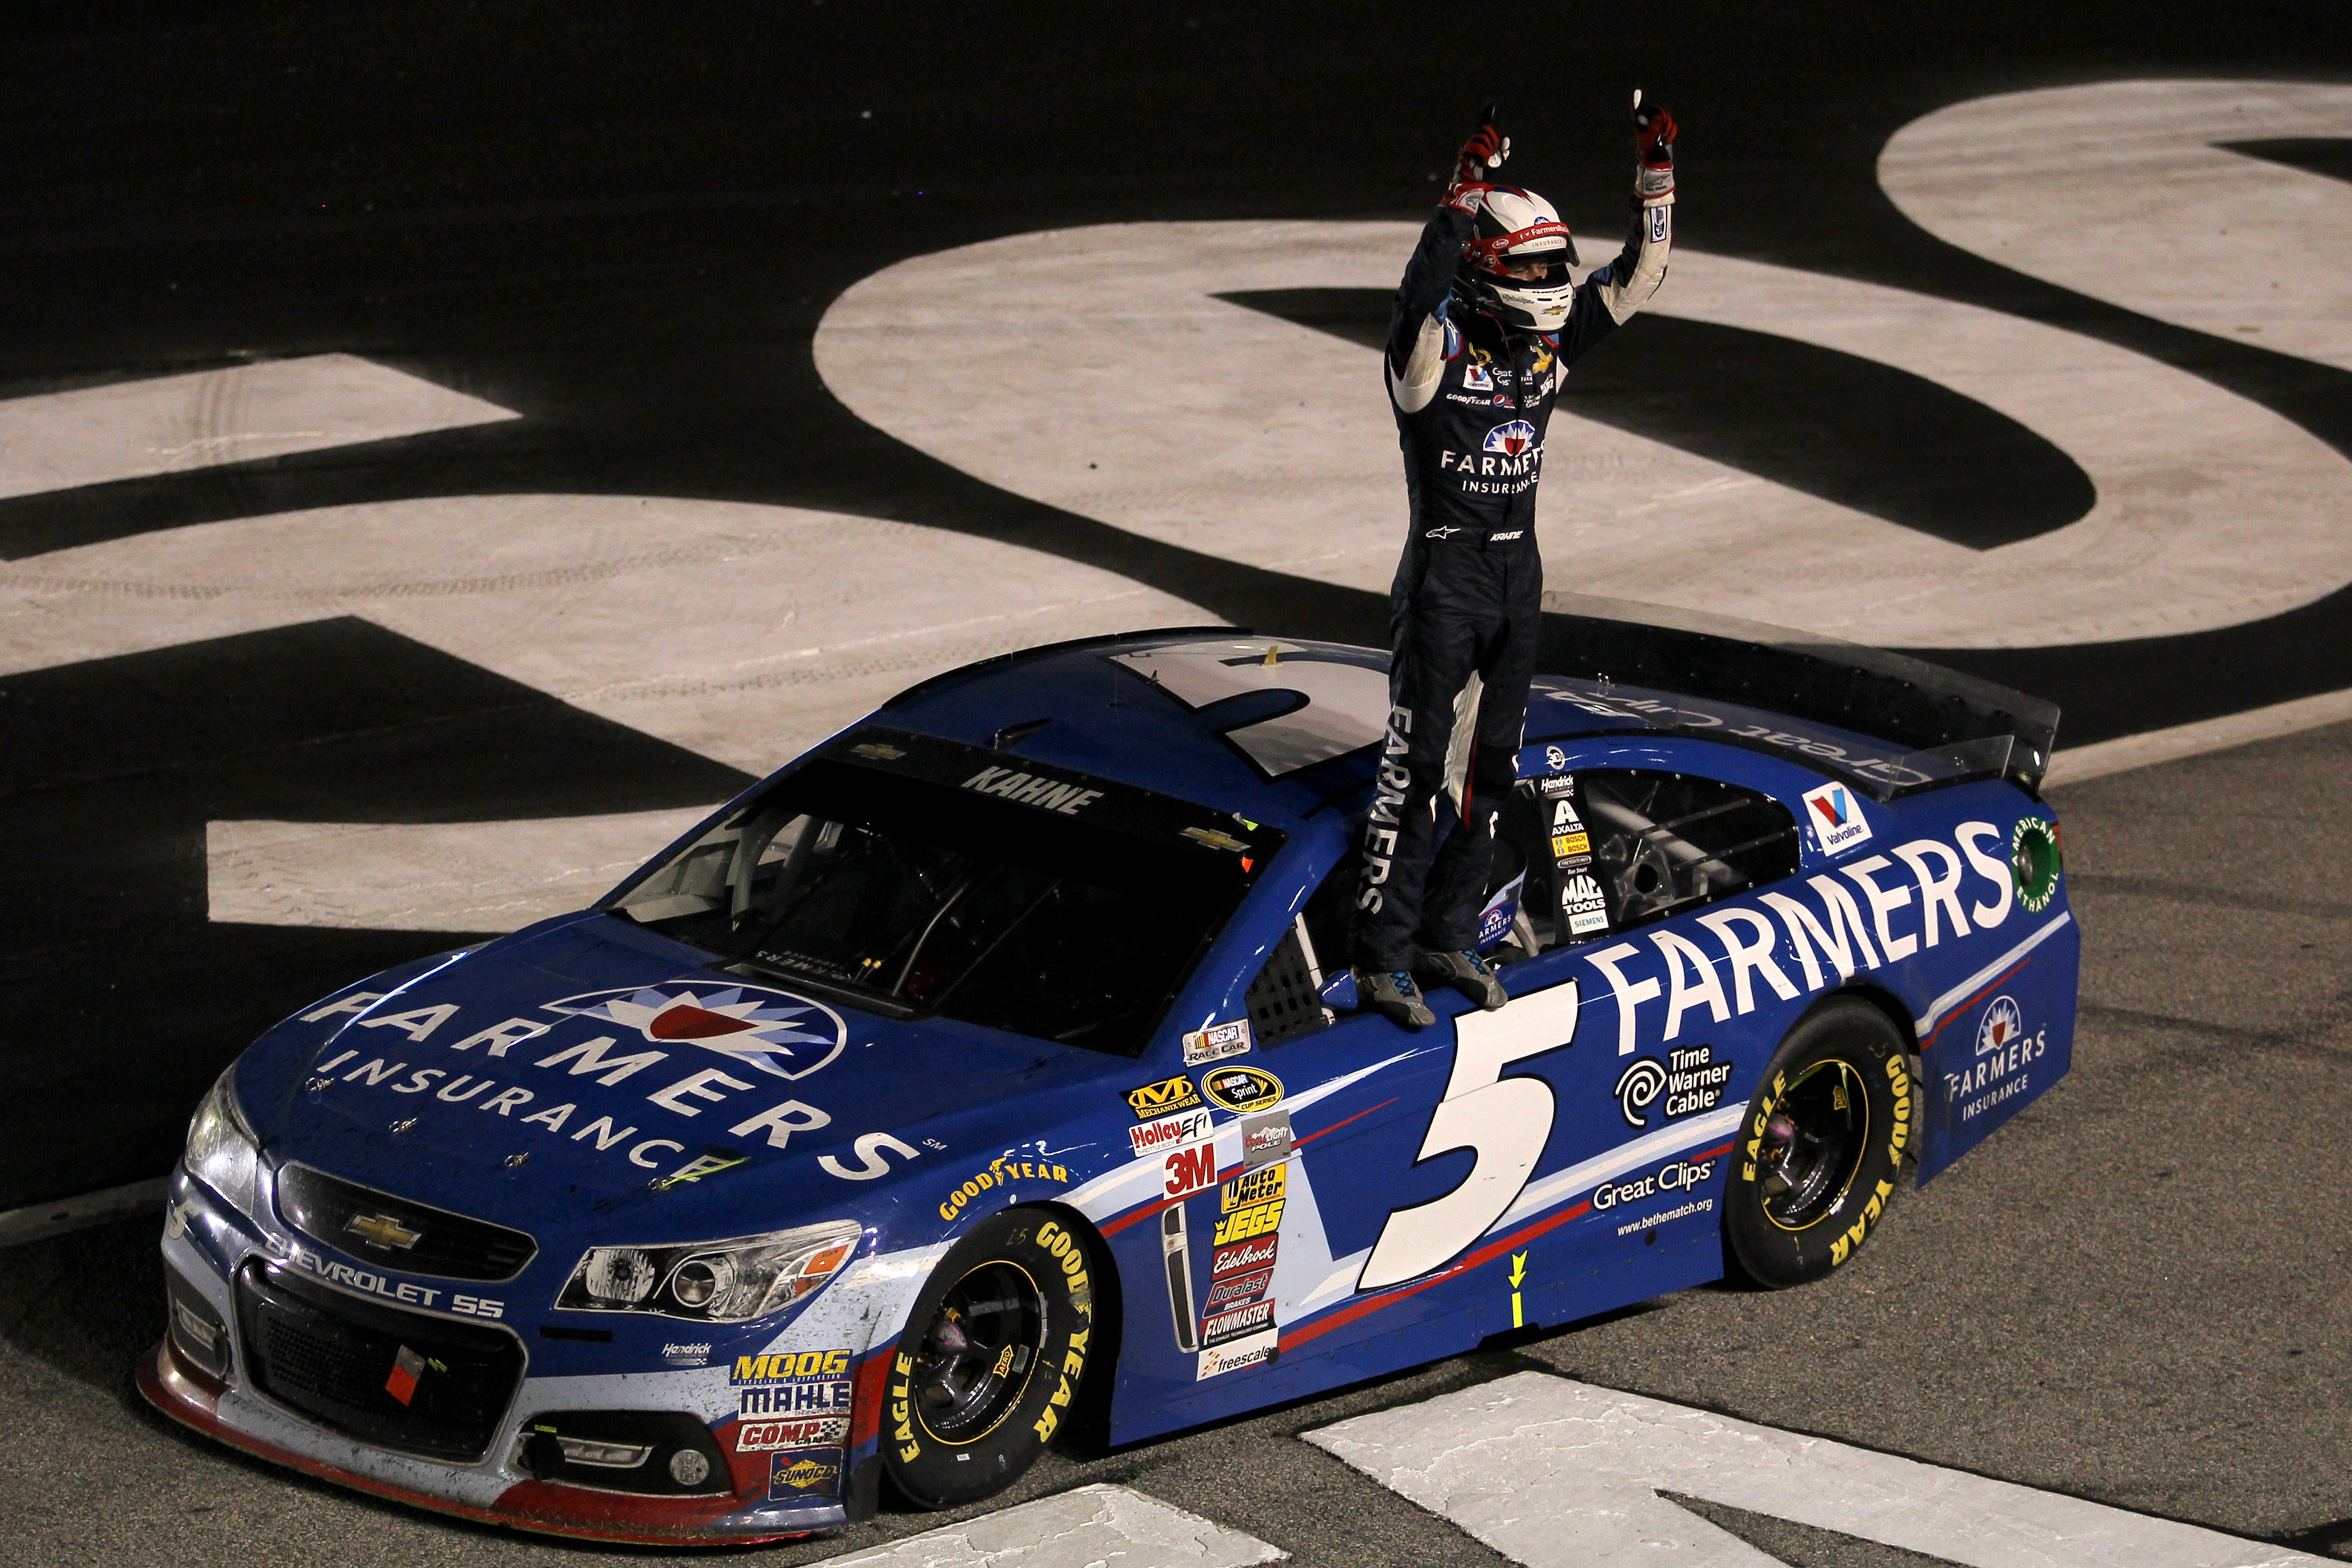 The way to guarantee a Chase spot now is to simply win.  It took a while, but Kasey Kahne finally got his.